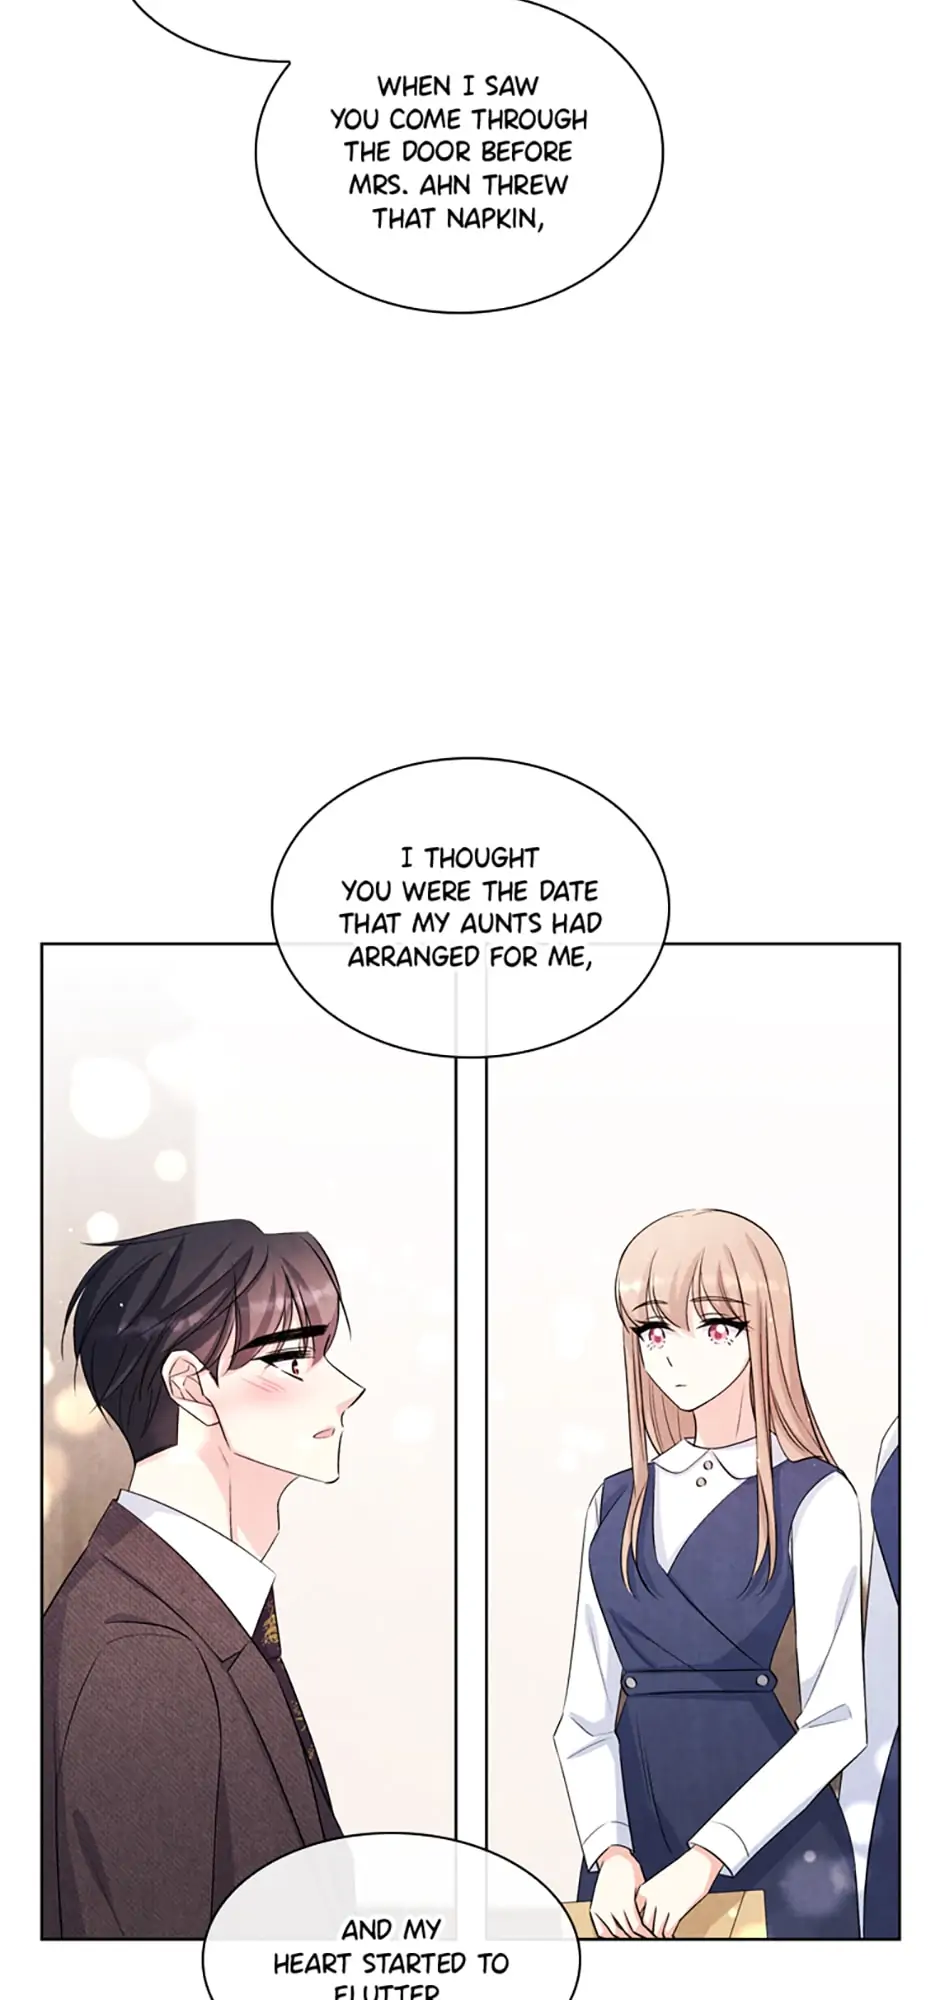 In-house stalking is prohibited chapter 47